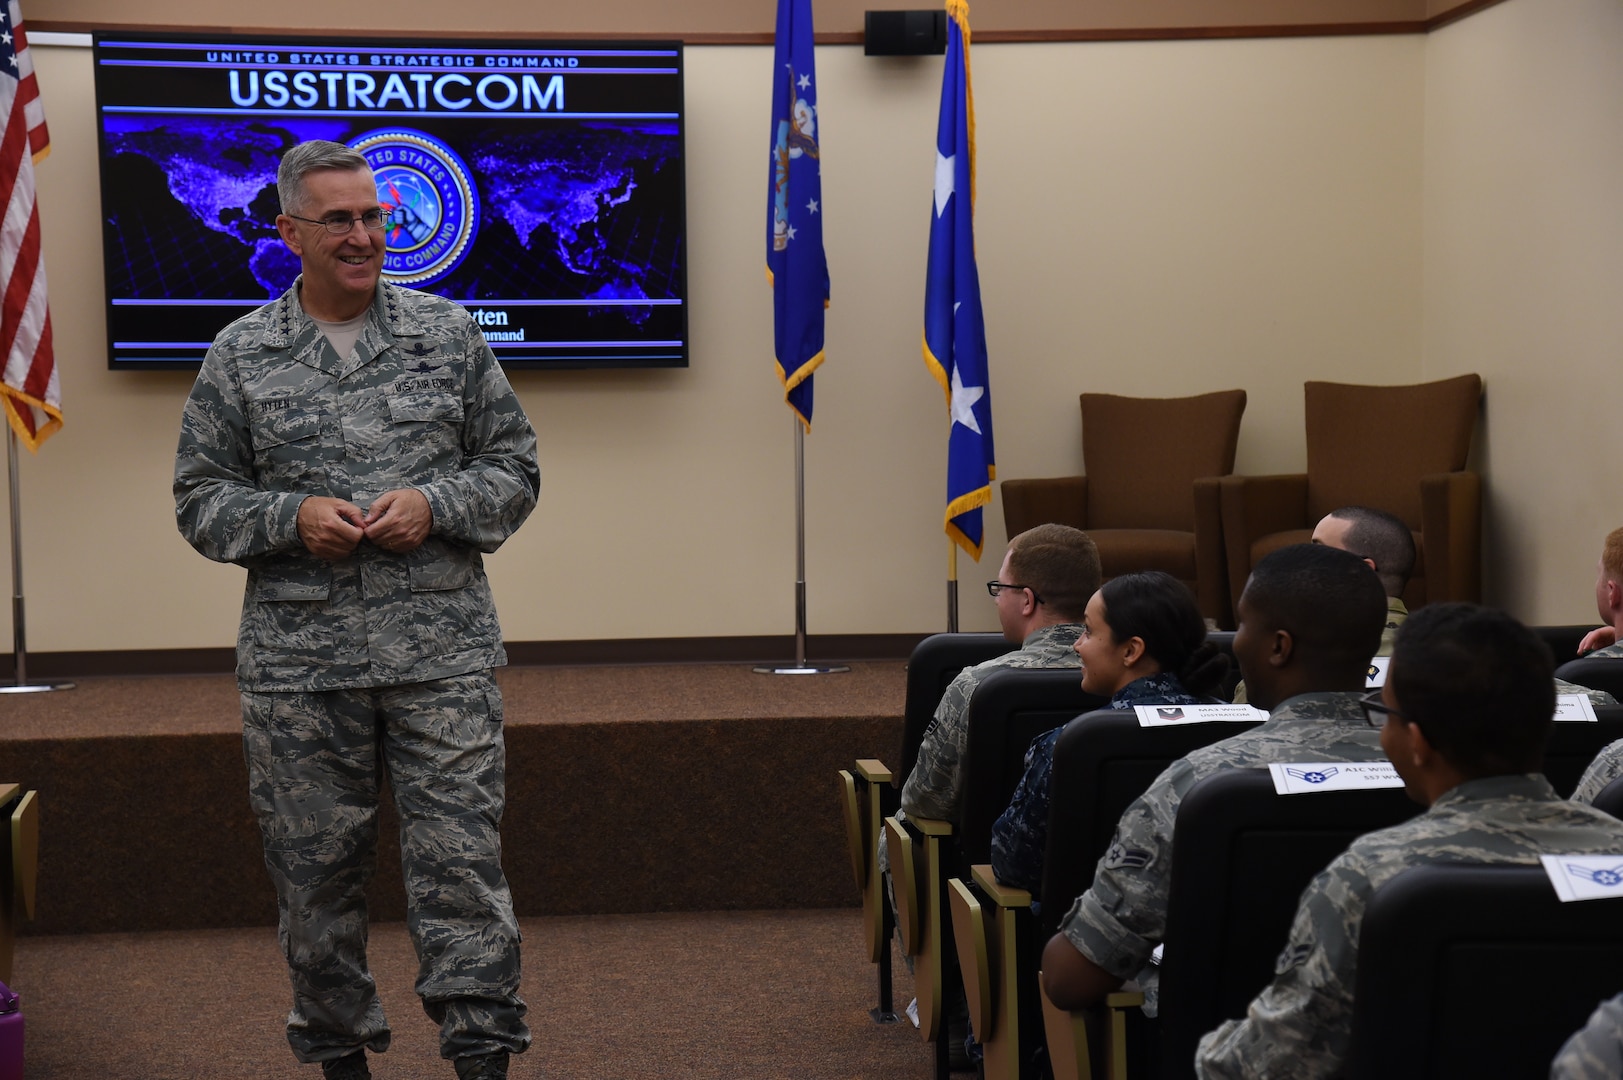 U.S. Air Force Gen. John Hyten, commander of U.S. Strategic Command (USSTRATCOM), speaks to junior-enlisted military members stationed at Offutt Air Force Base, Neb., during the inaugural Junior Enlisted Professional Development Seminar, July 19, 2018. During the seminar, junior-enlisted members discussed a variety of topics with USSTRATCOM non-commissioned officers, petty officers and senior leaders. Topics included leadership, junior-enlisted roles and responsibilities, mentoring, military traditions and history, educational benefits, and customs and courtesies. USSTRATCOM has global responsibilities assigned through the Unified Command Plan that include strategic deterrence, nuclear operations, space operations, joint electromagnetic spectrum operations, global strike, missile defense, and analysis and targeting.